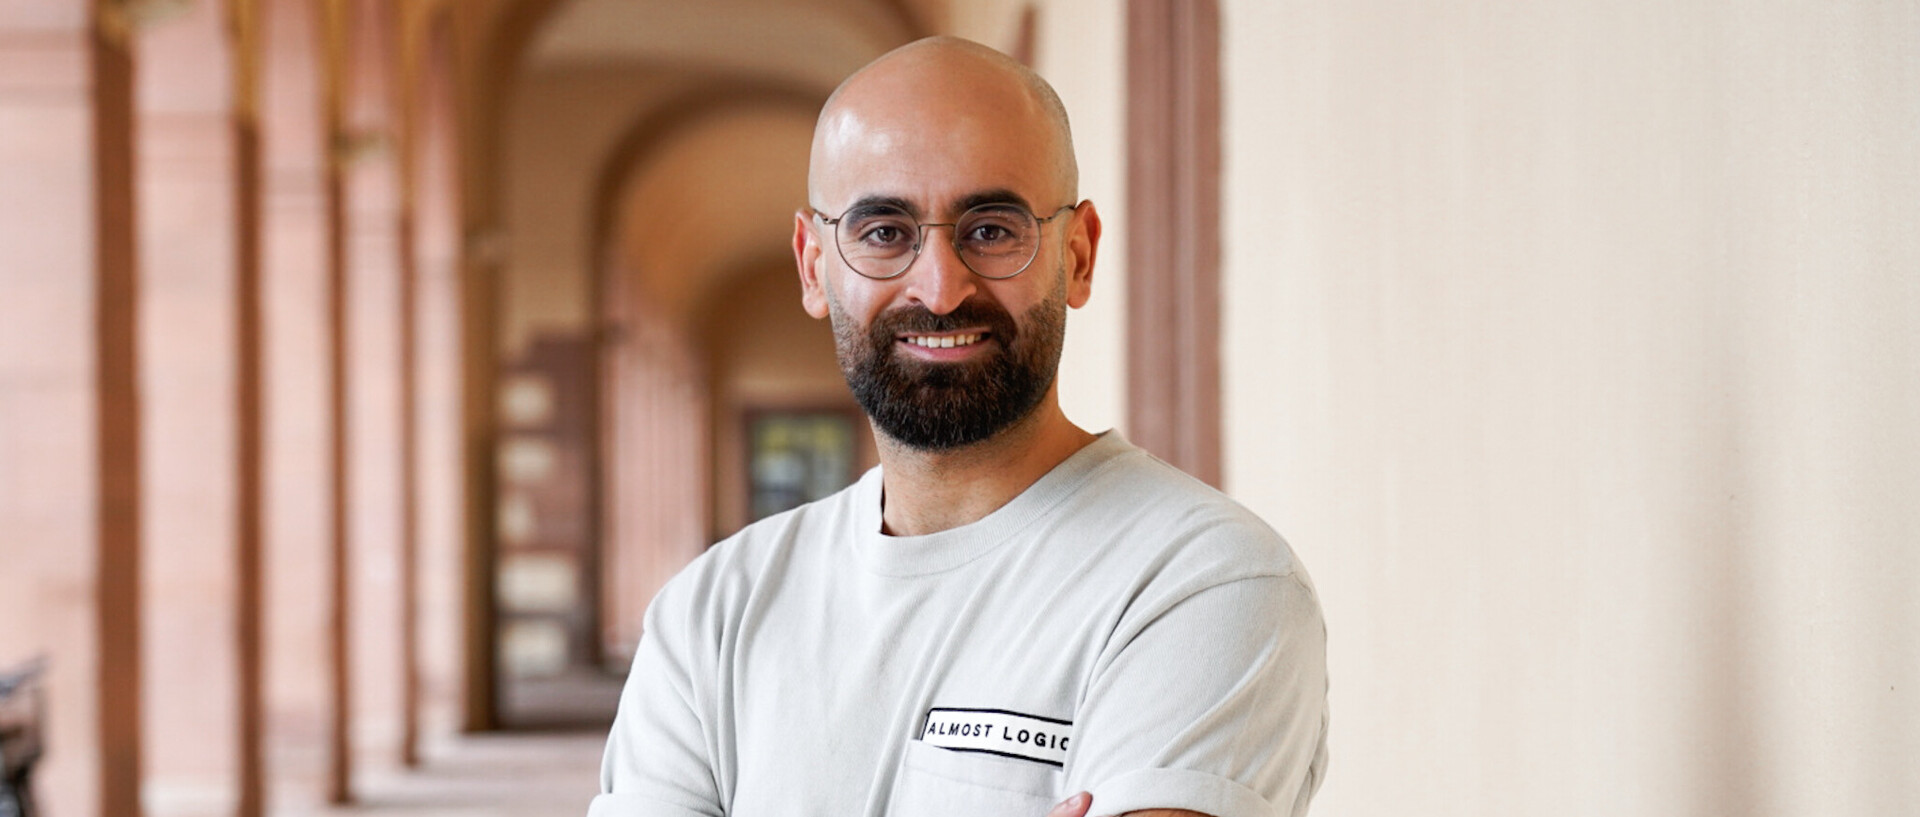 Hassan Abdolaziz stands smiling in an entrance hall of the Schloss. He wears a beige T-shirt and crosses his arms in front of his chest.